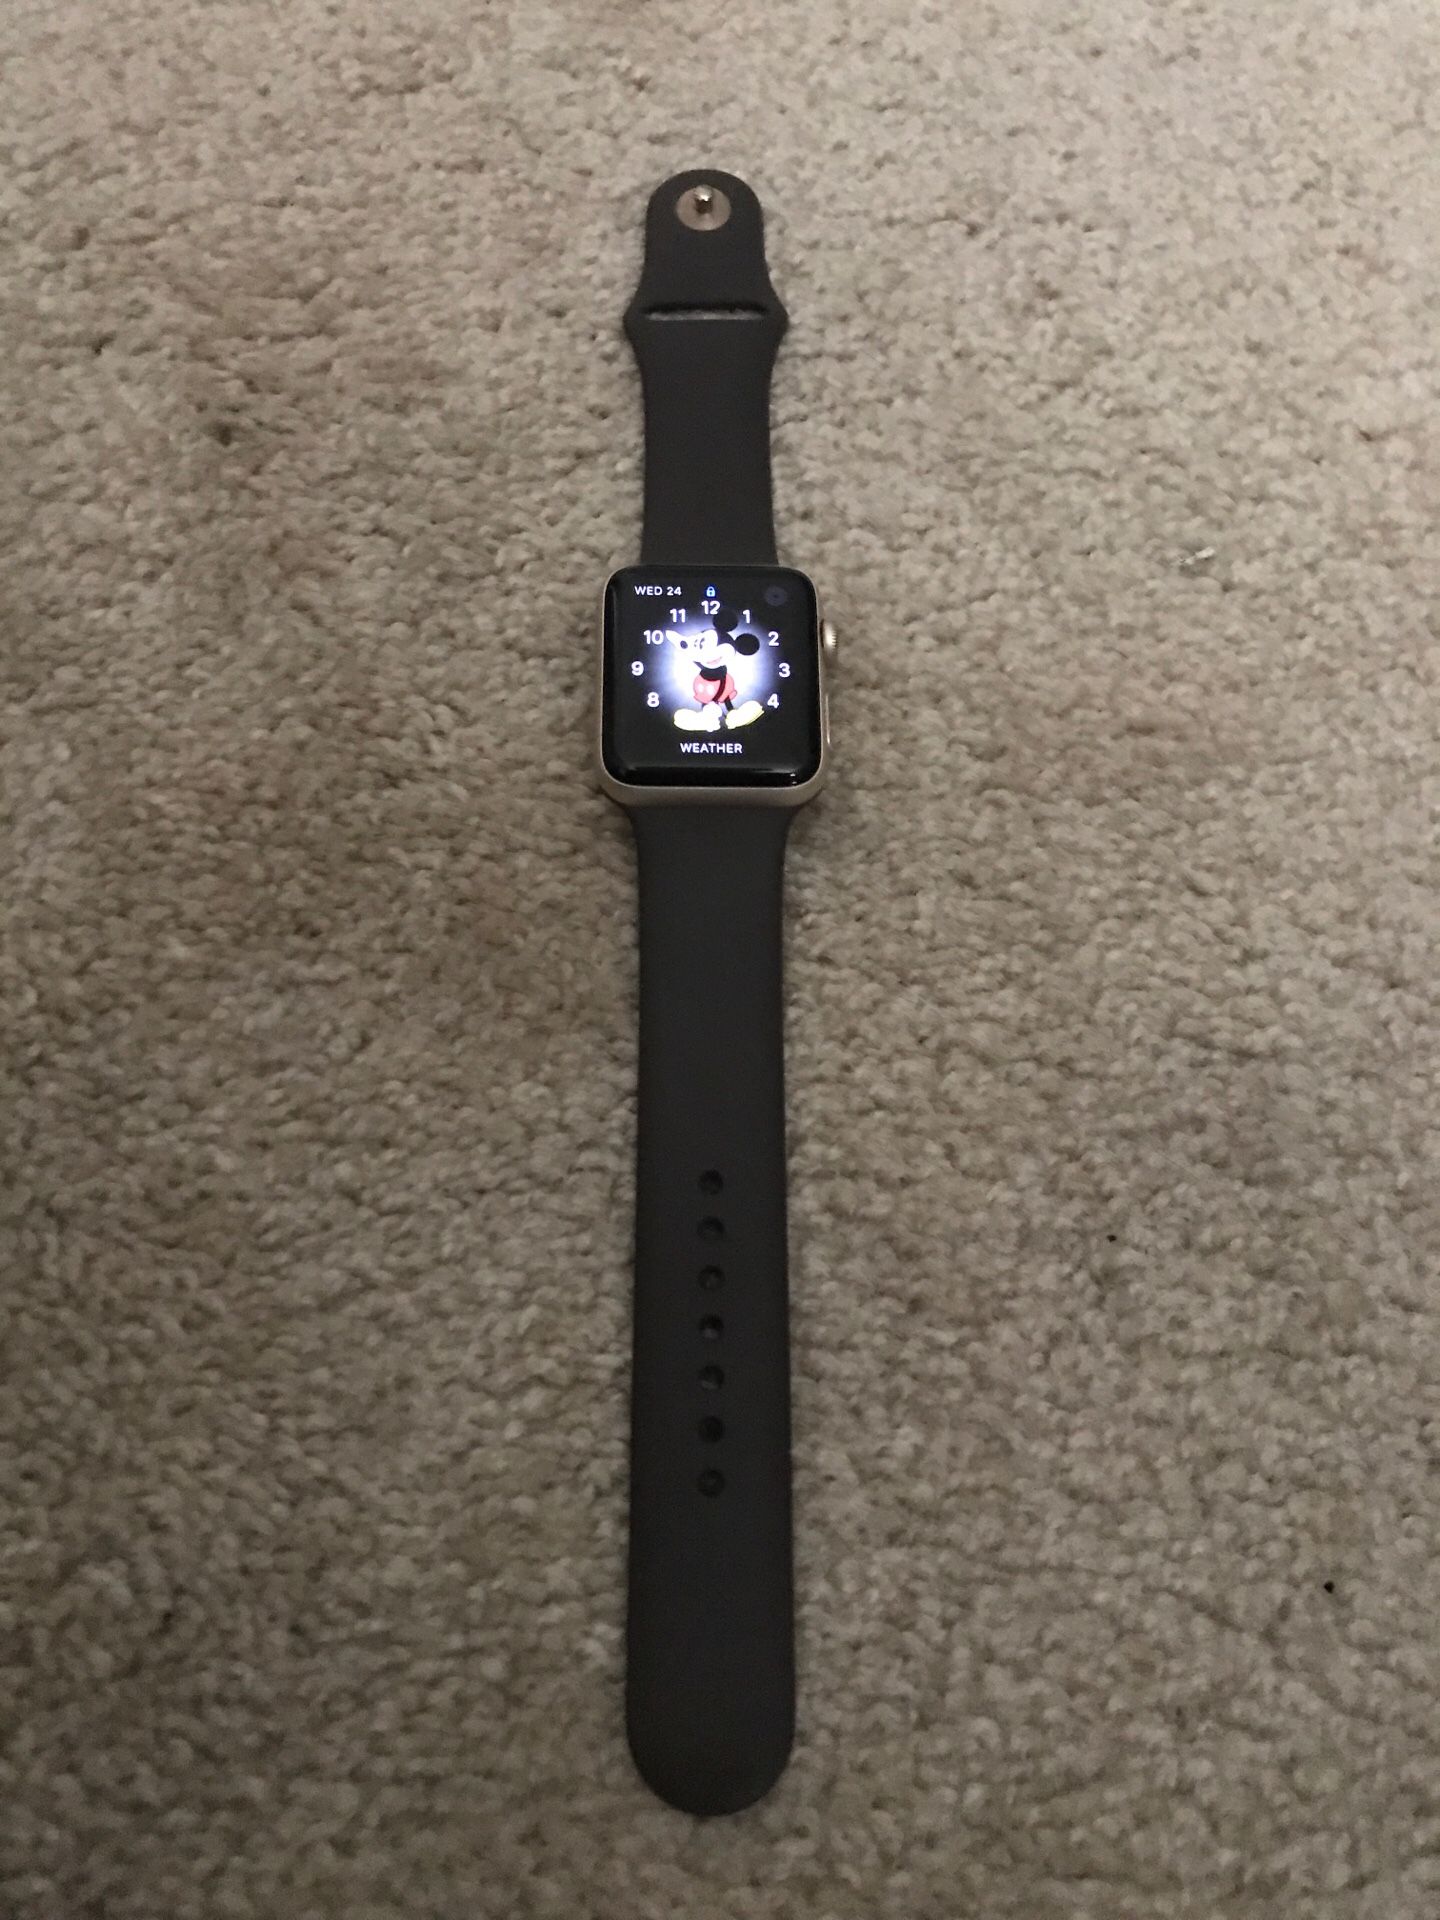 Apple Watch 2nd Generation. 42 mm. Water Resistant